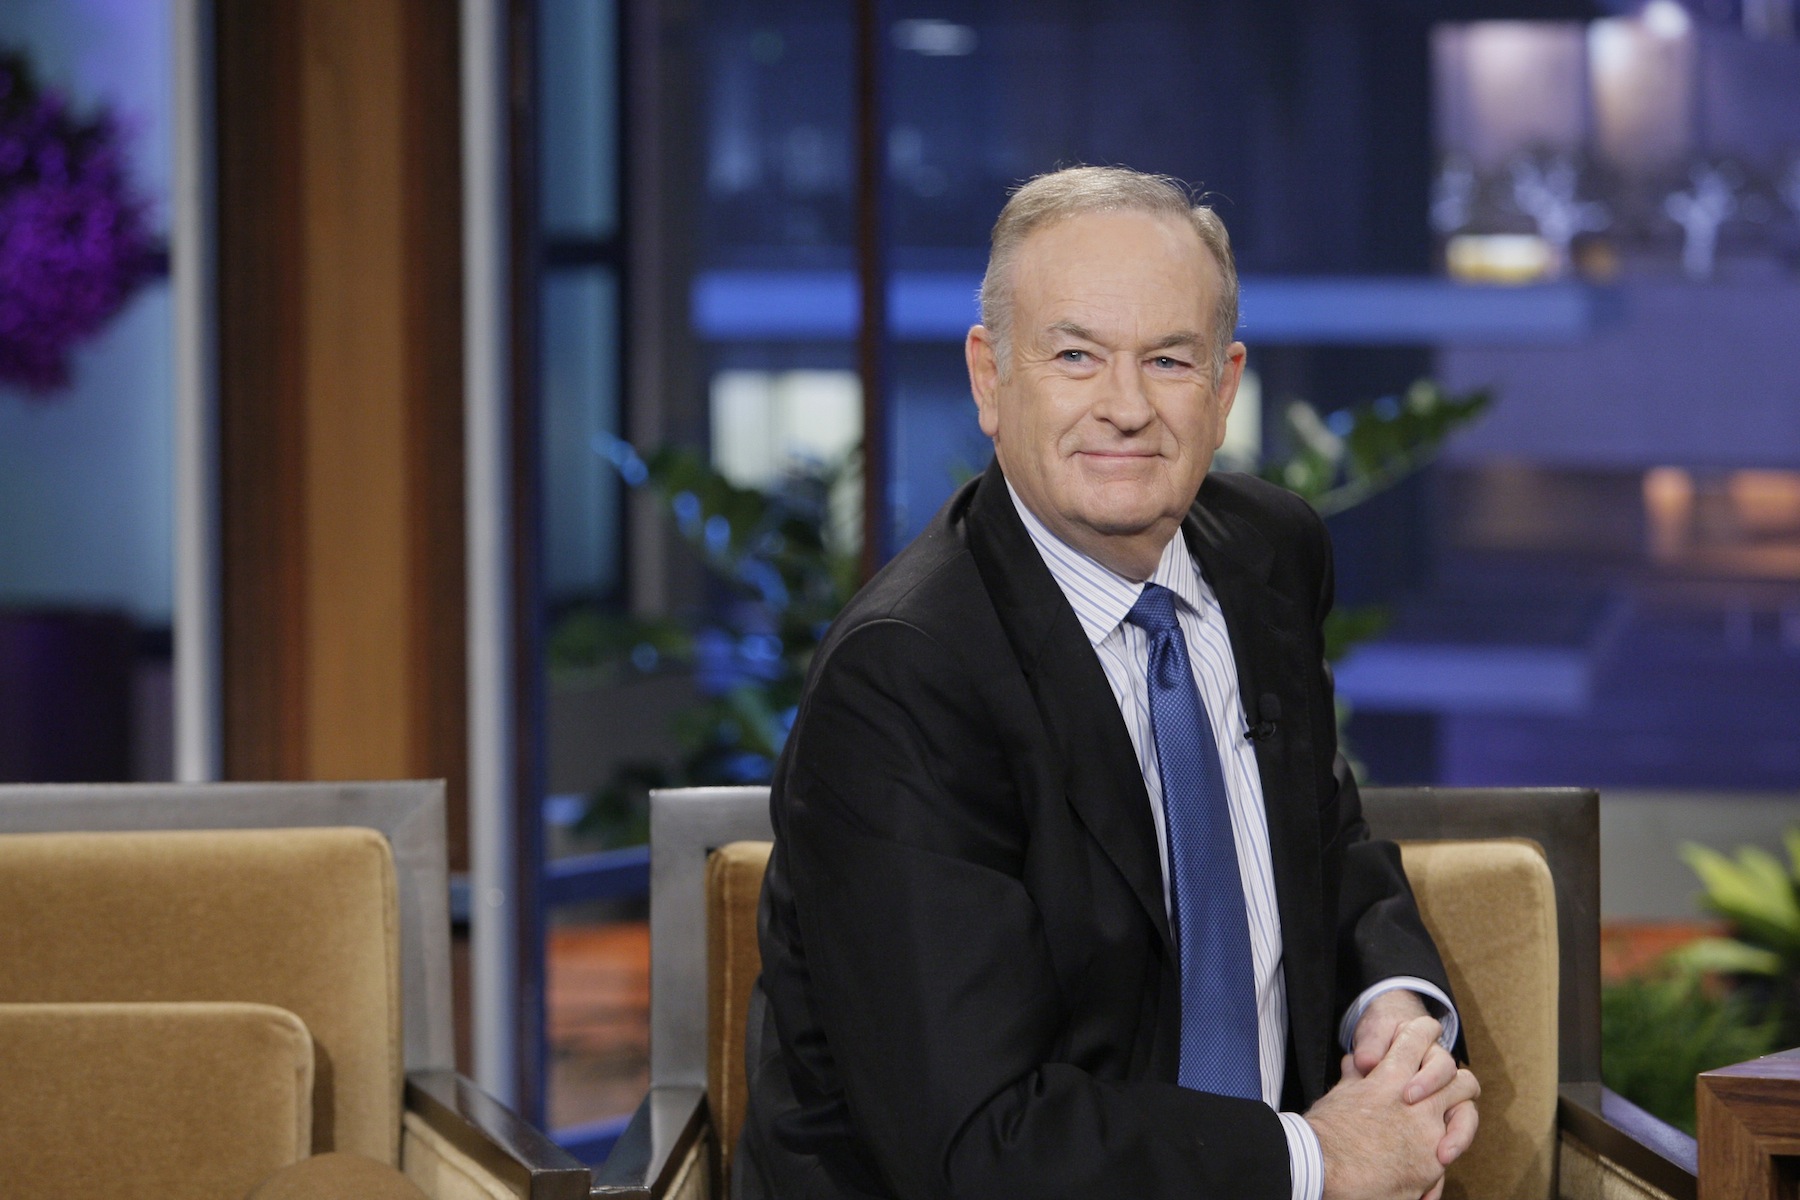 Bill O'Reilly during an interview on 'The Tonight Show with Jay Leno' on Nov. 18, 2013